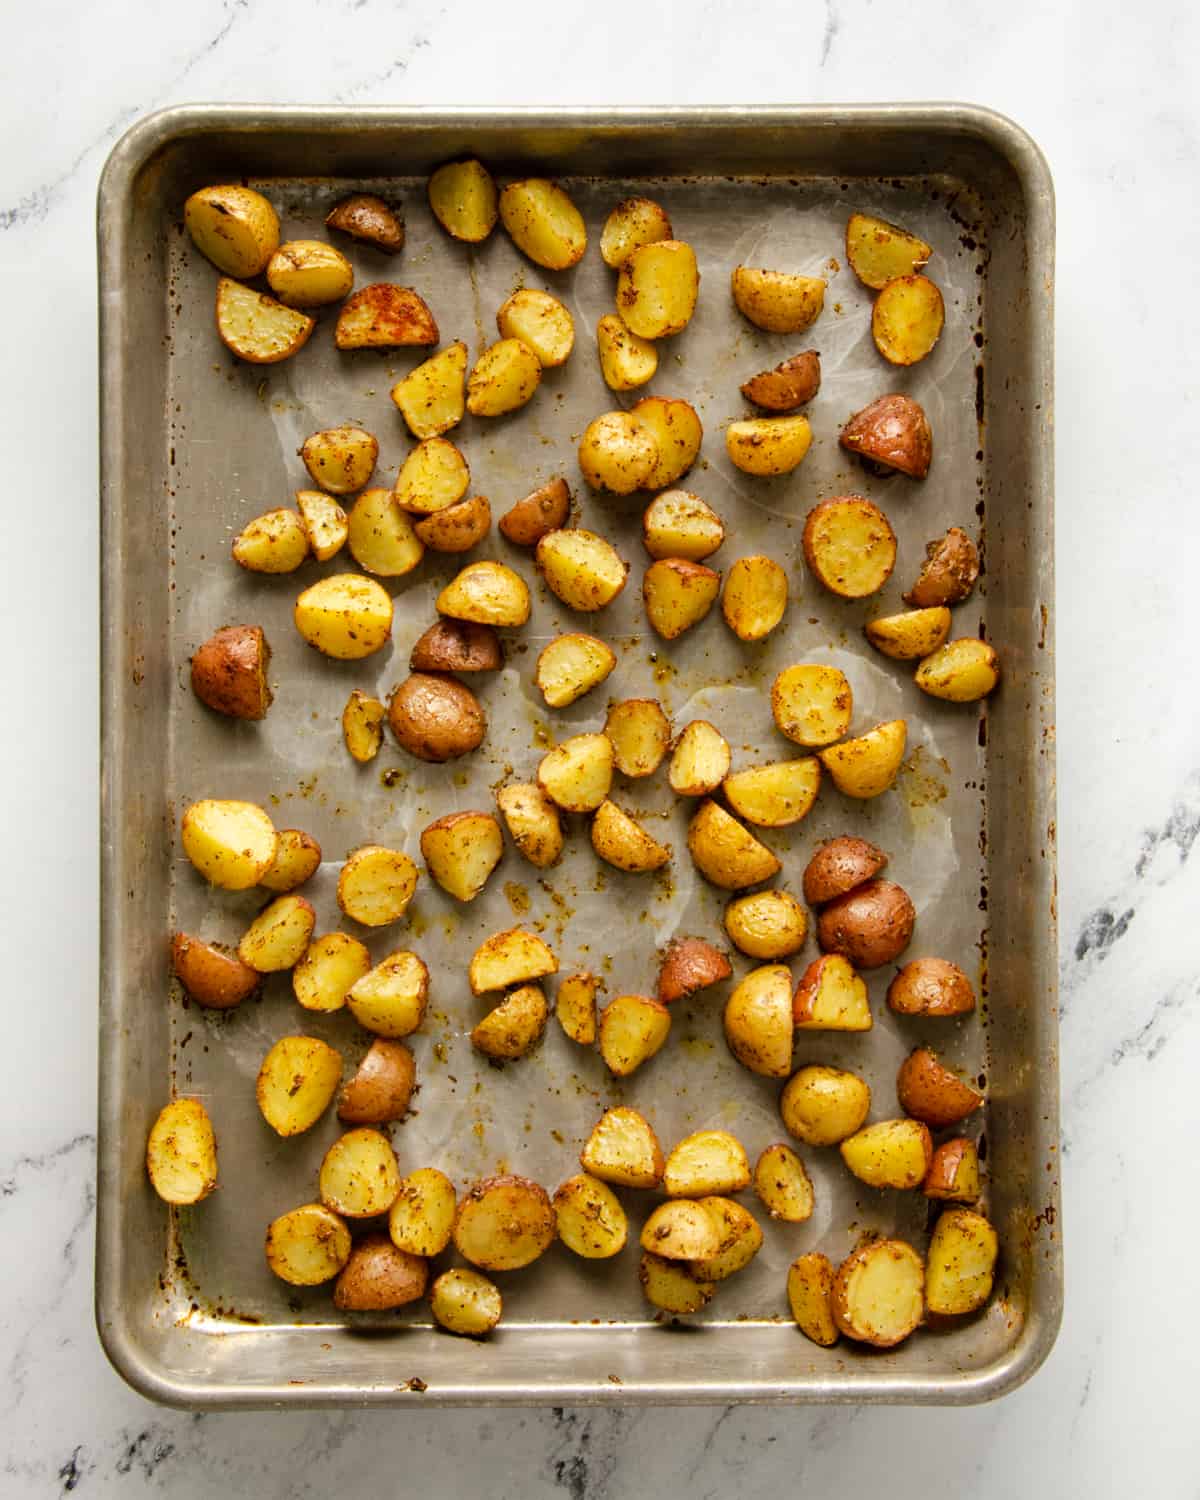 Partially roasted breakfast potatoes on a baking sheet.